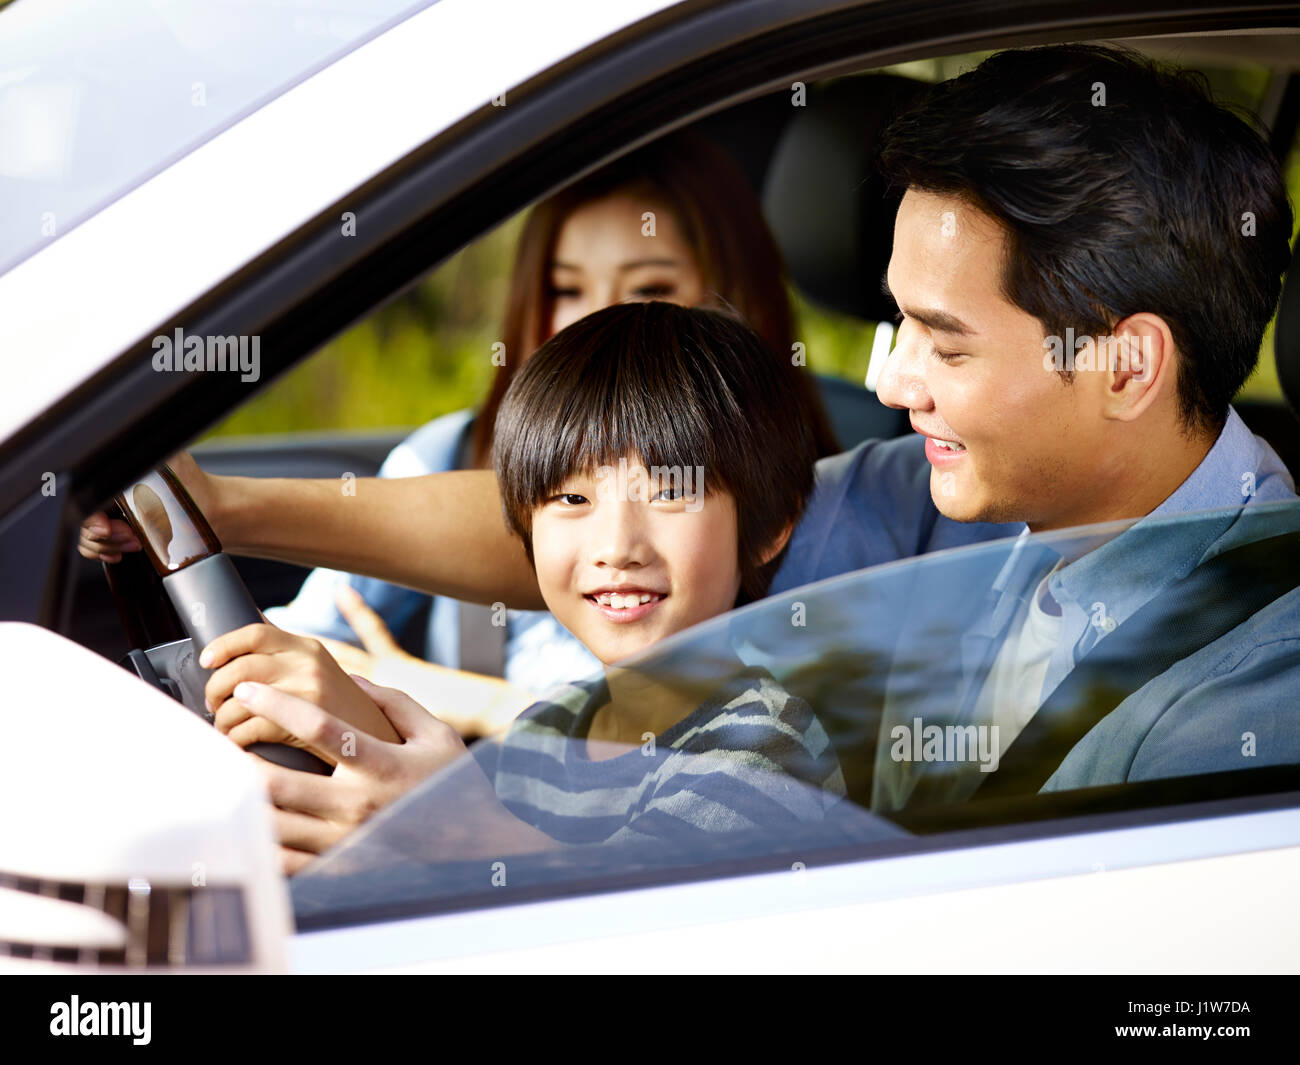 asian father letting his son hold the steering wheel of his car. Stock Photo